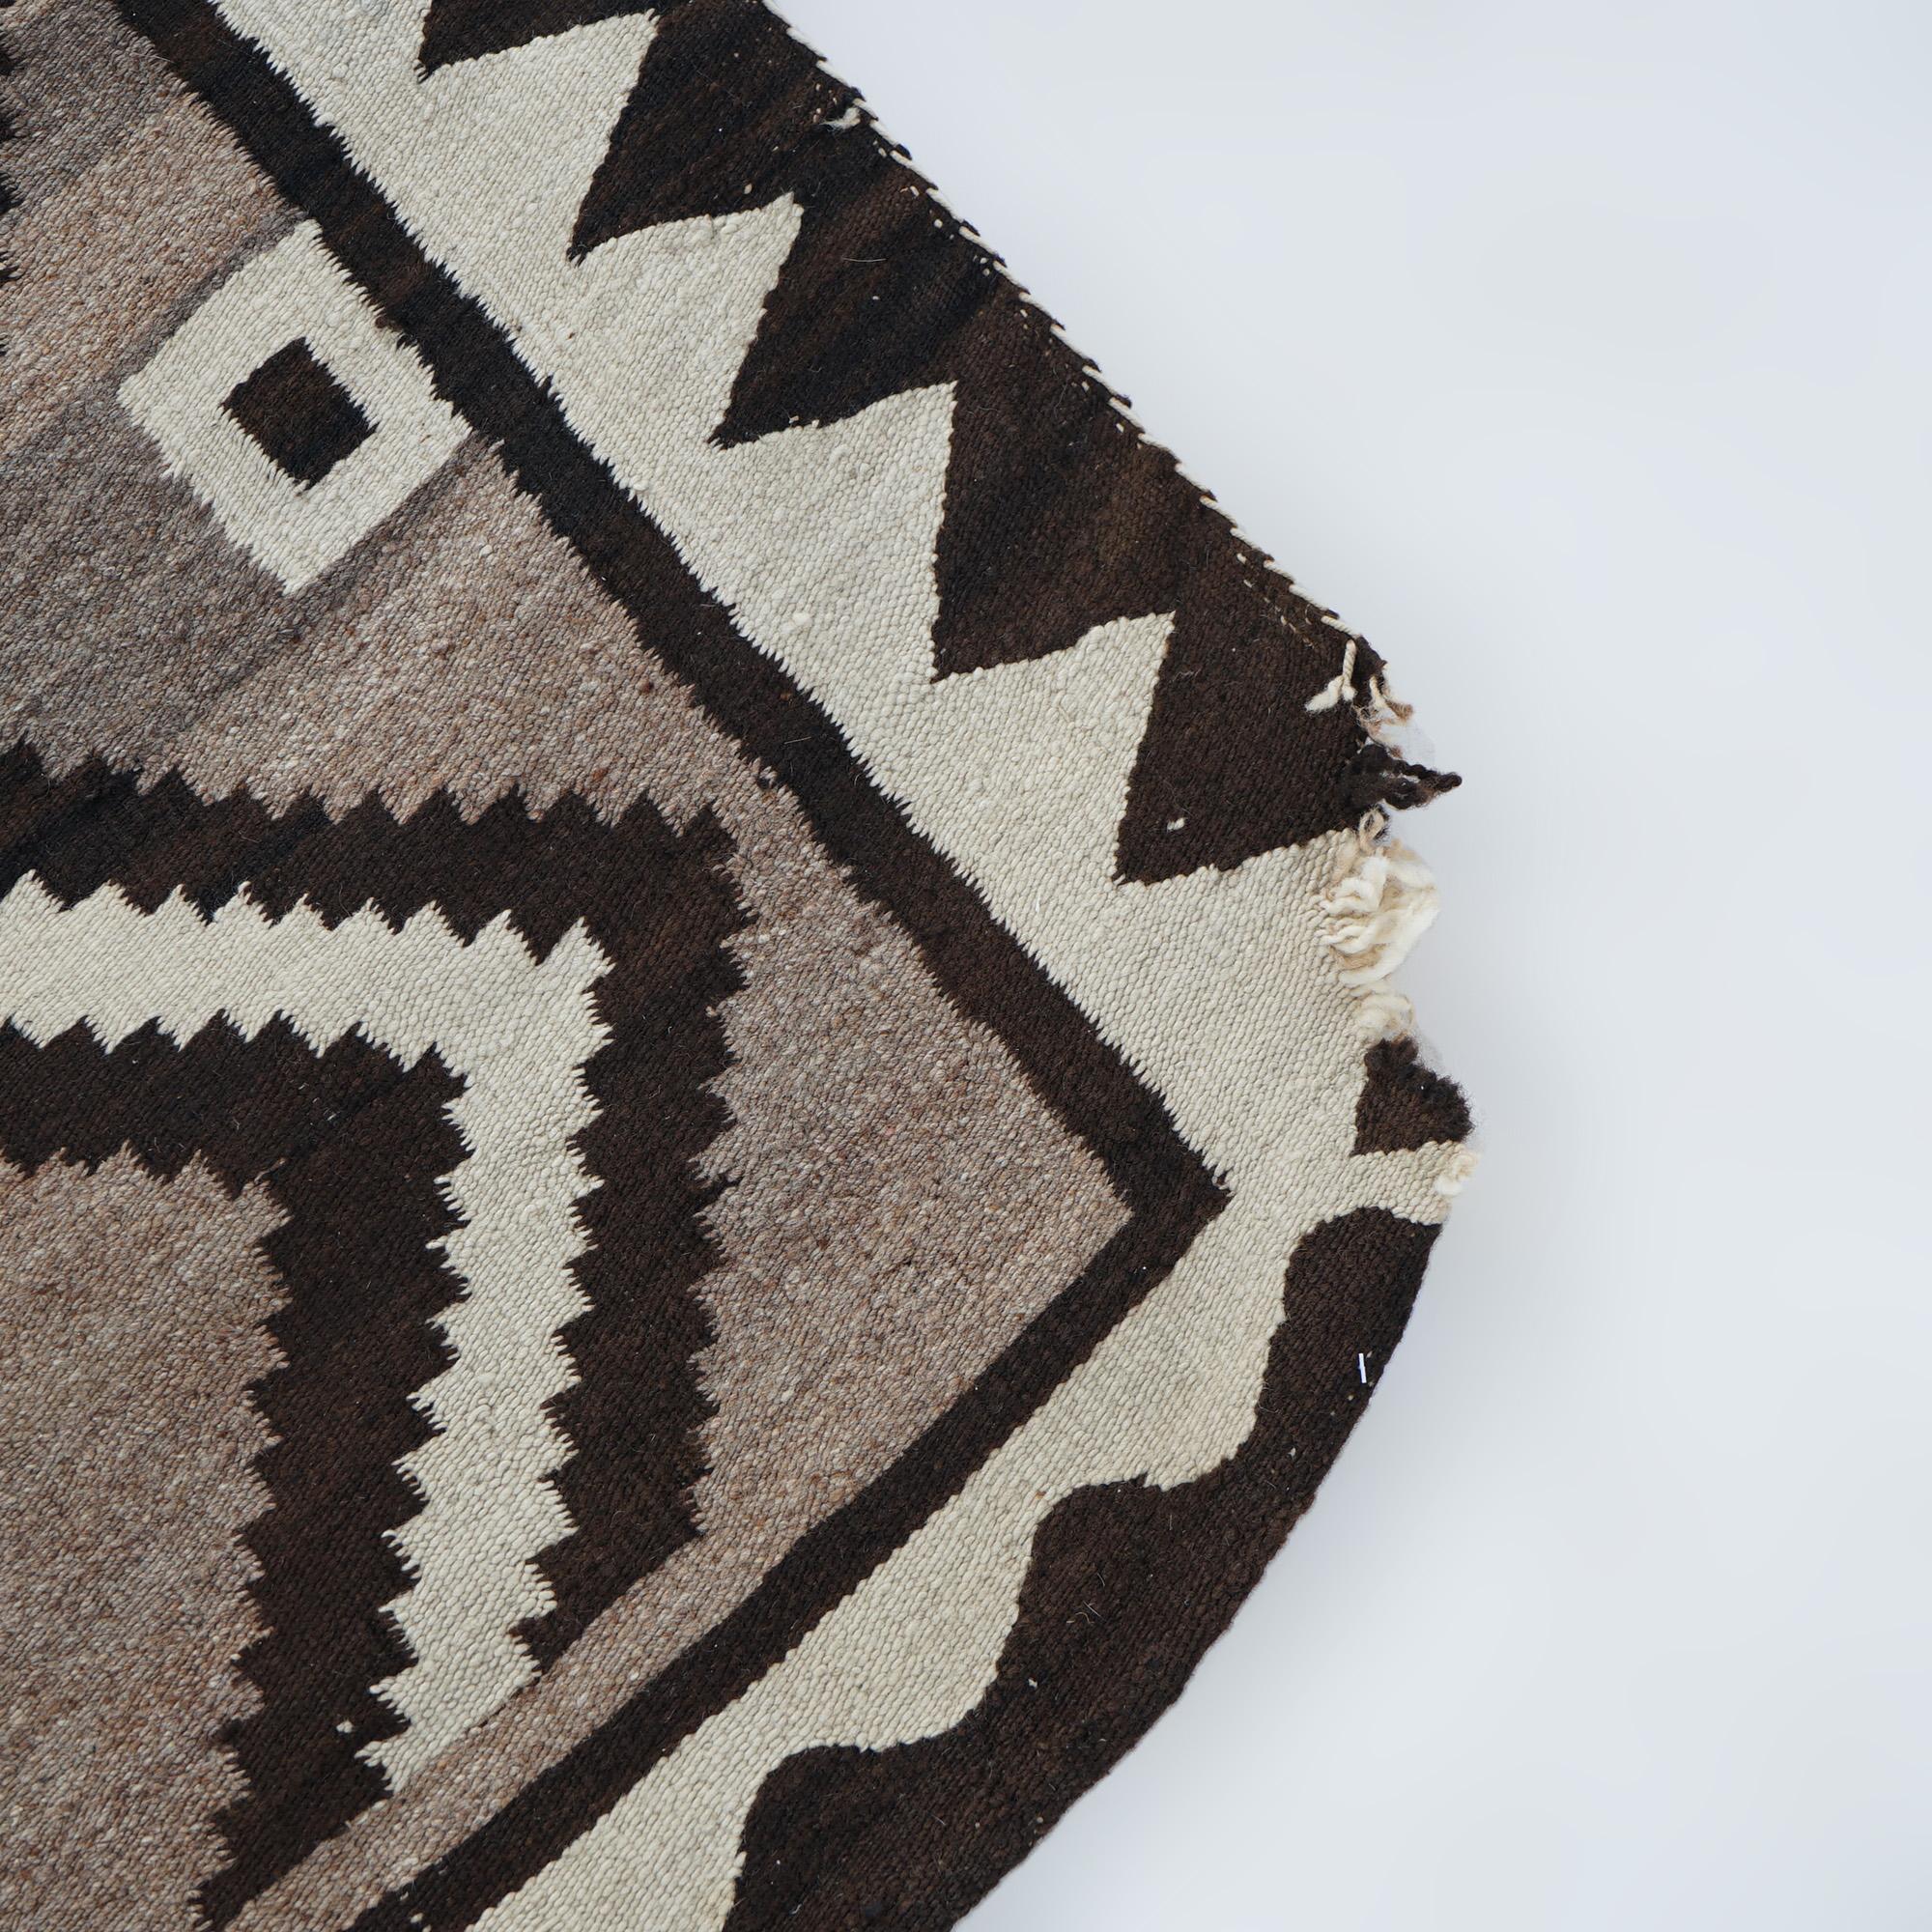 Antique Two Gray Hills Southwest American Indian Navajo Wool Rug Circa 1920 For Sale 5